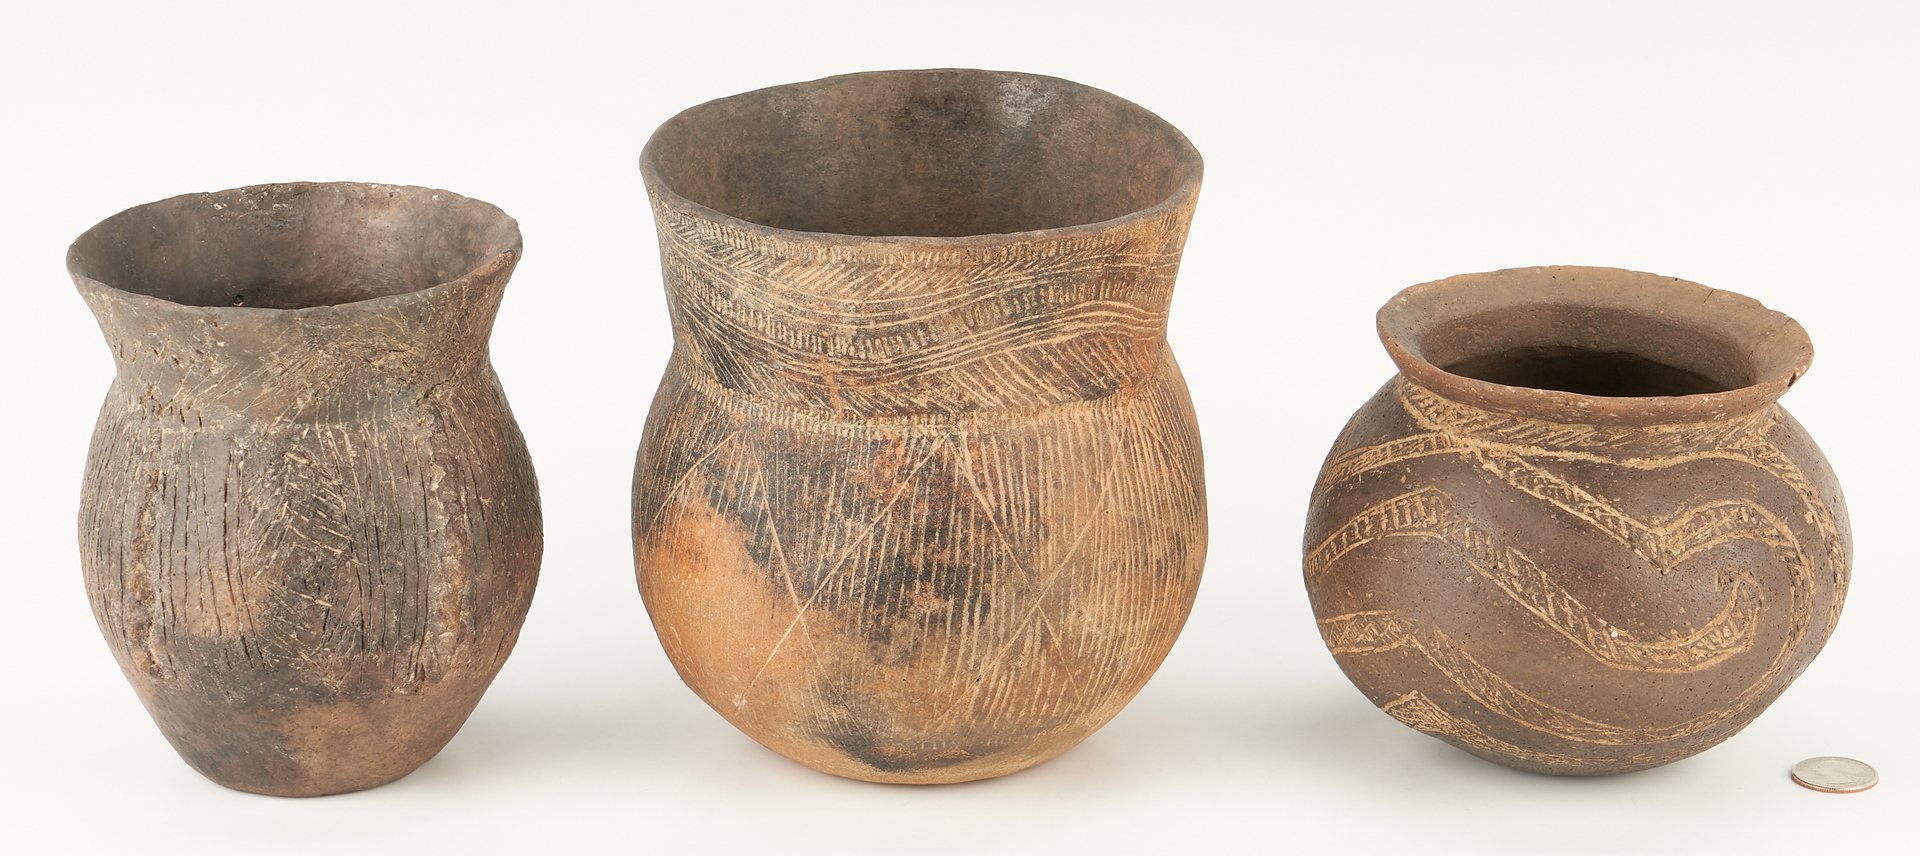 Lot 1118: 3 Mississippian Caddo Incised & Carved Jars